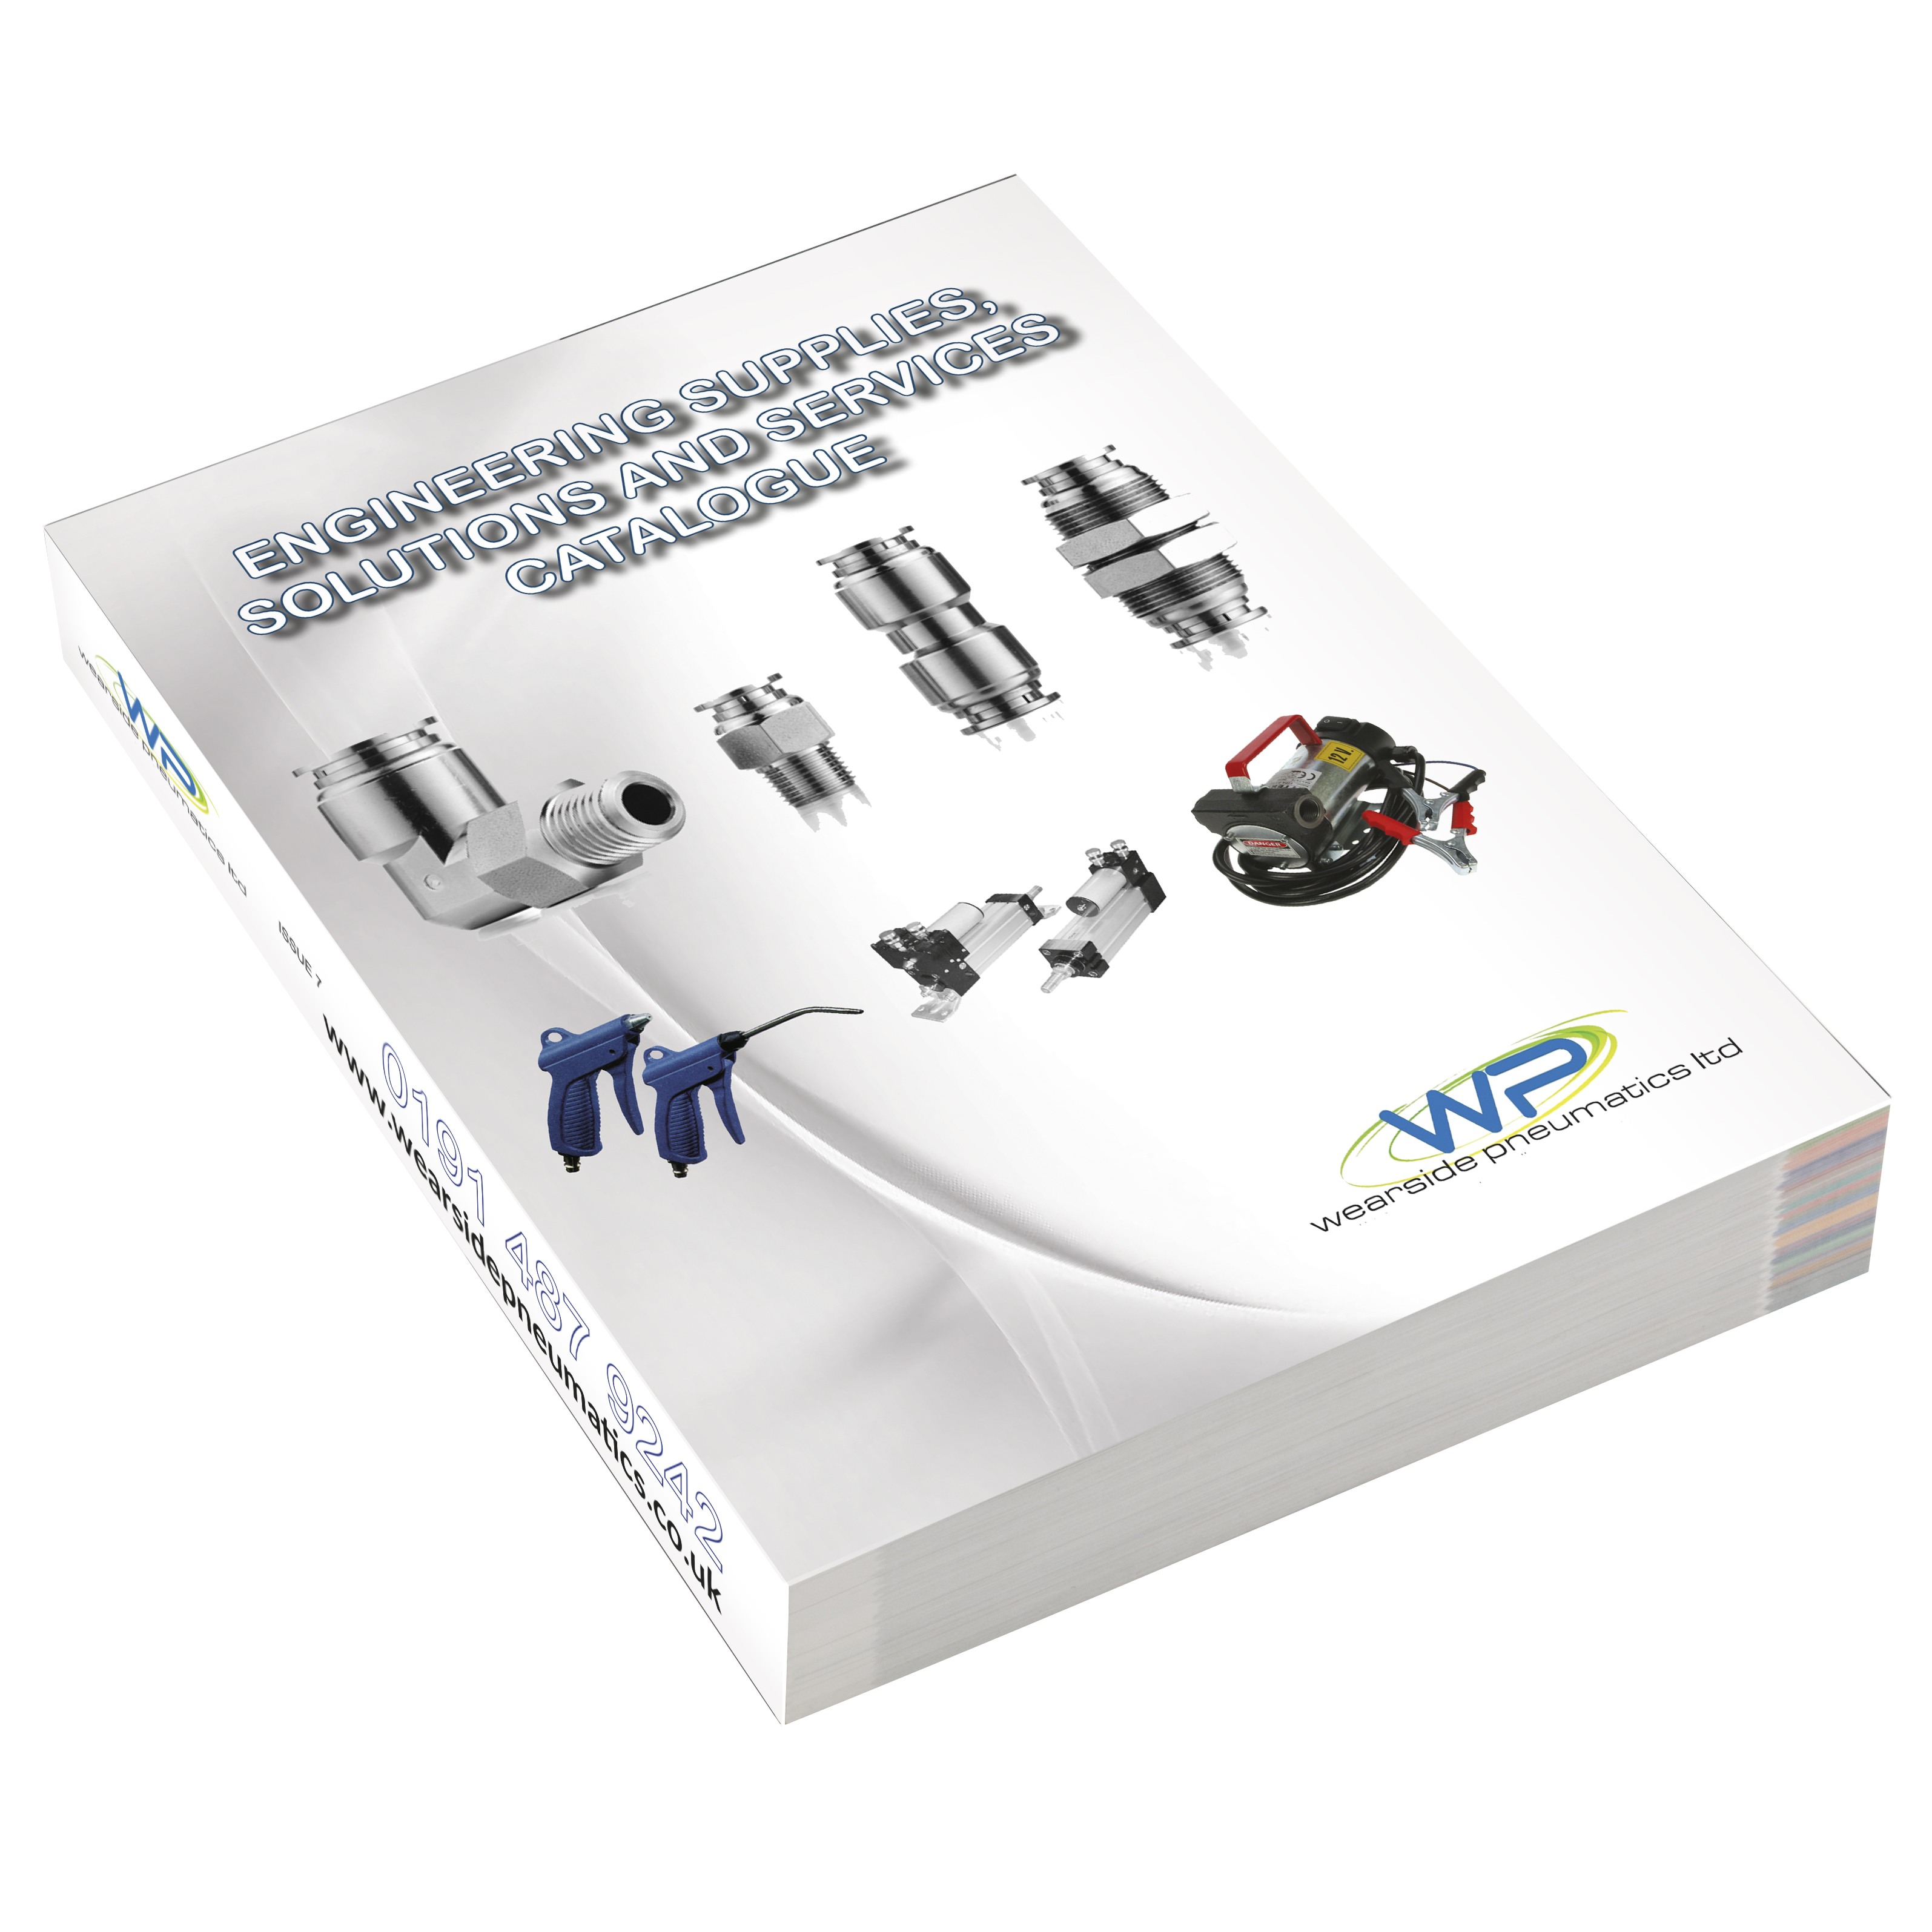 The new Pneumatics Catalogue from Wearside Pneumatics is out now!